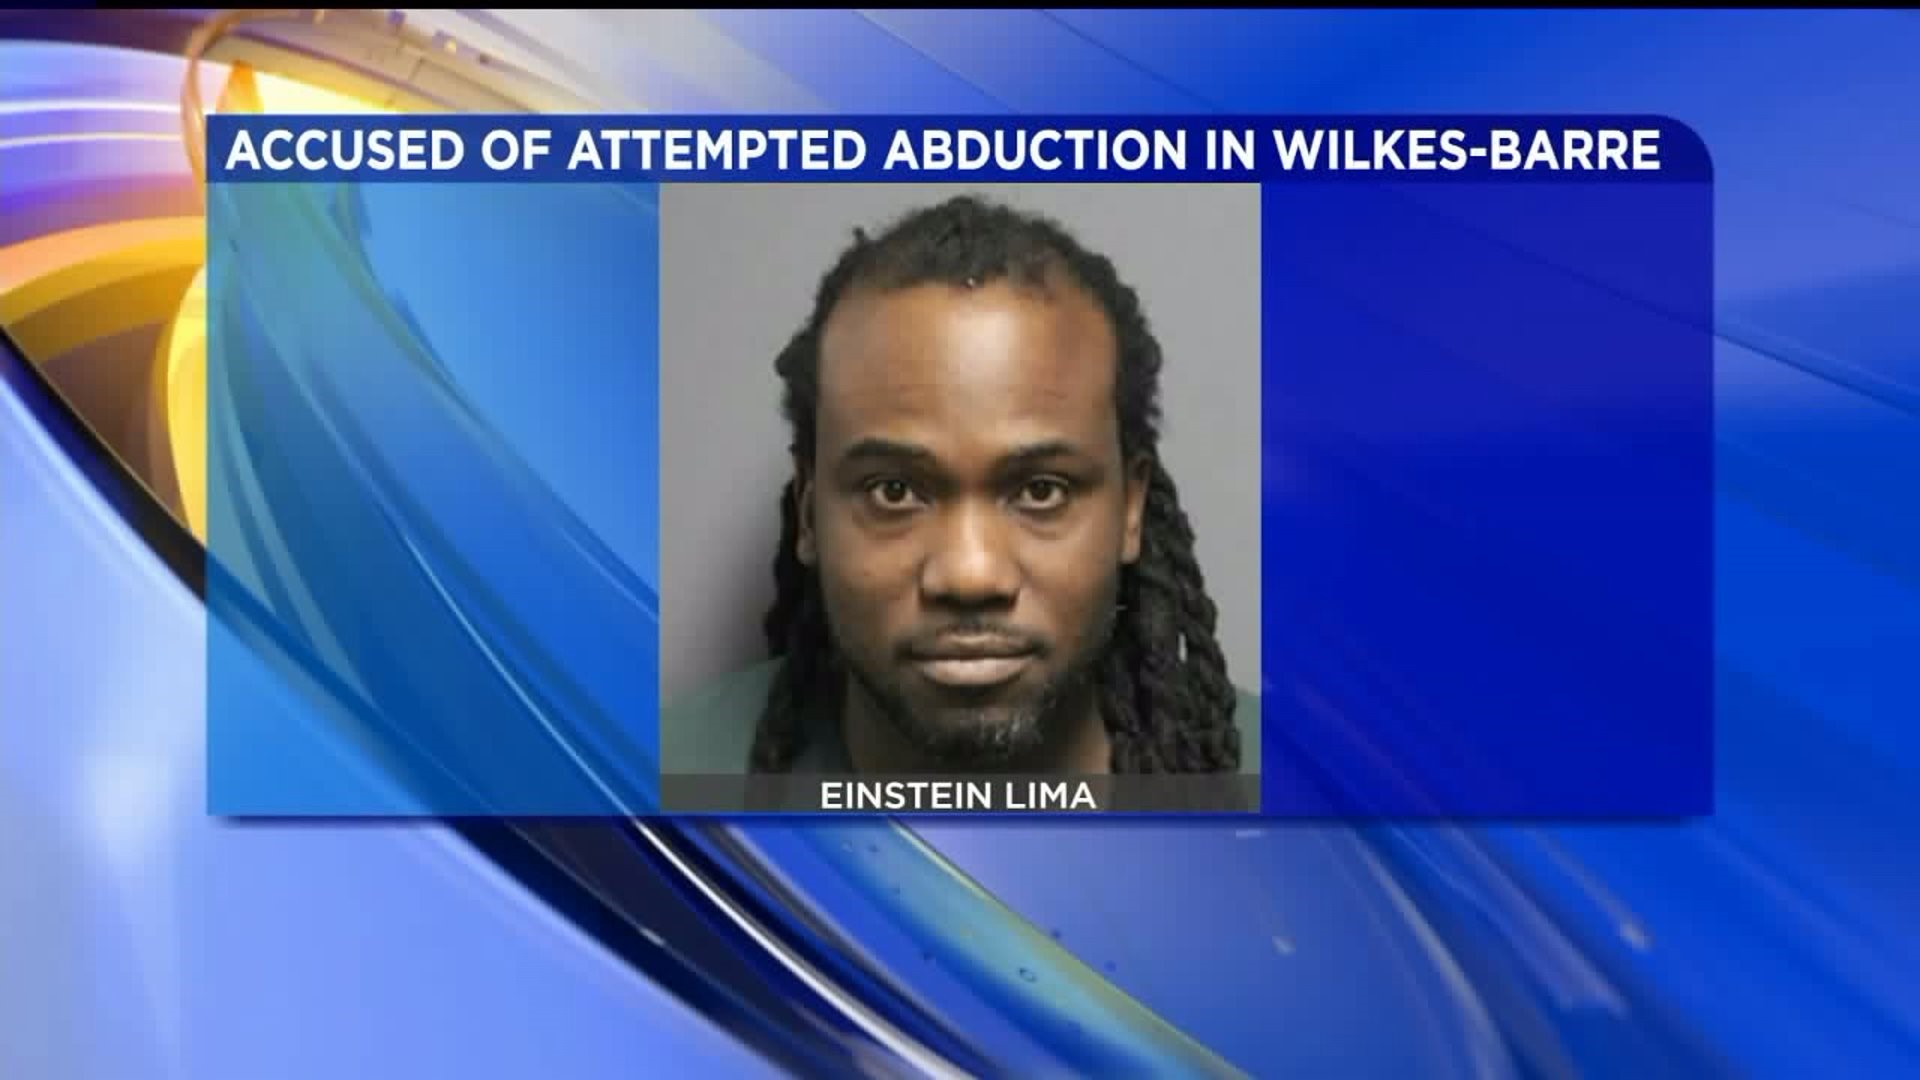 Man Arrested After Alleged Kidnapping Attempt in Wilkes-Barre